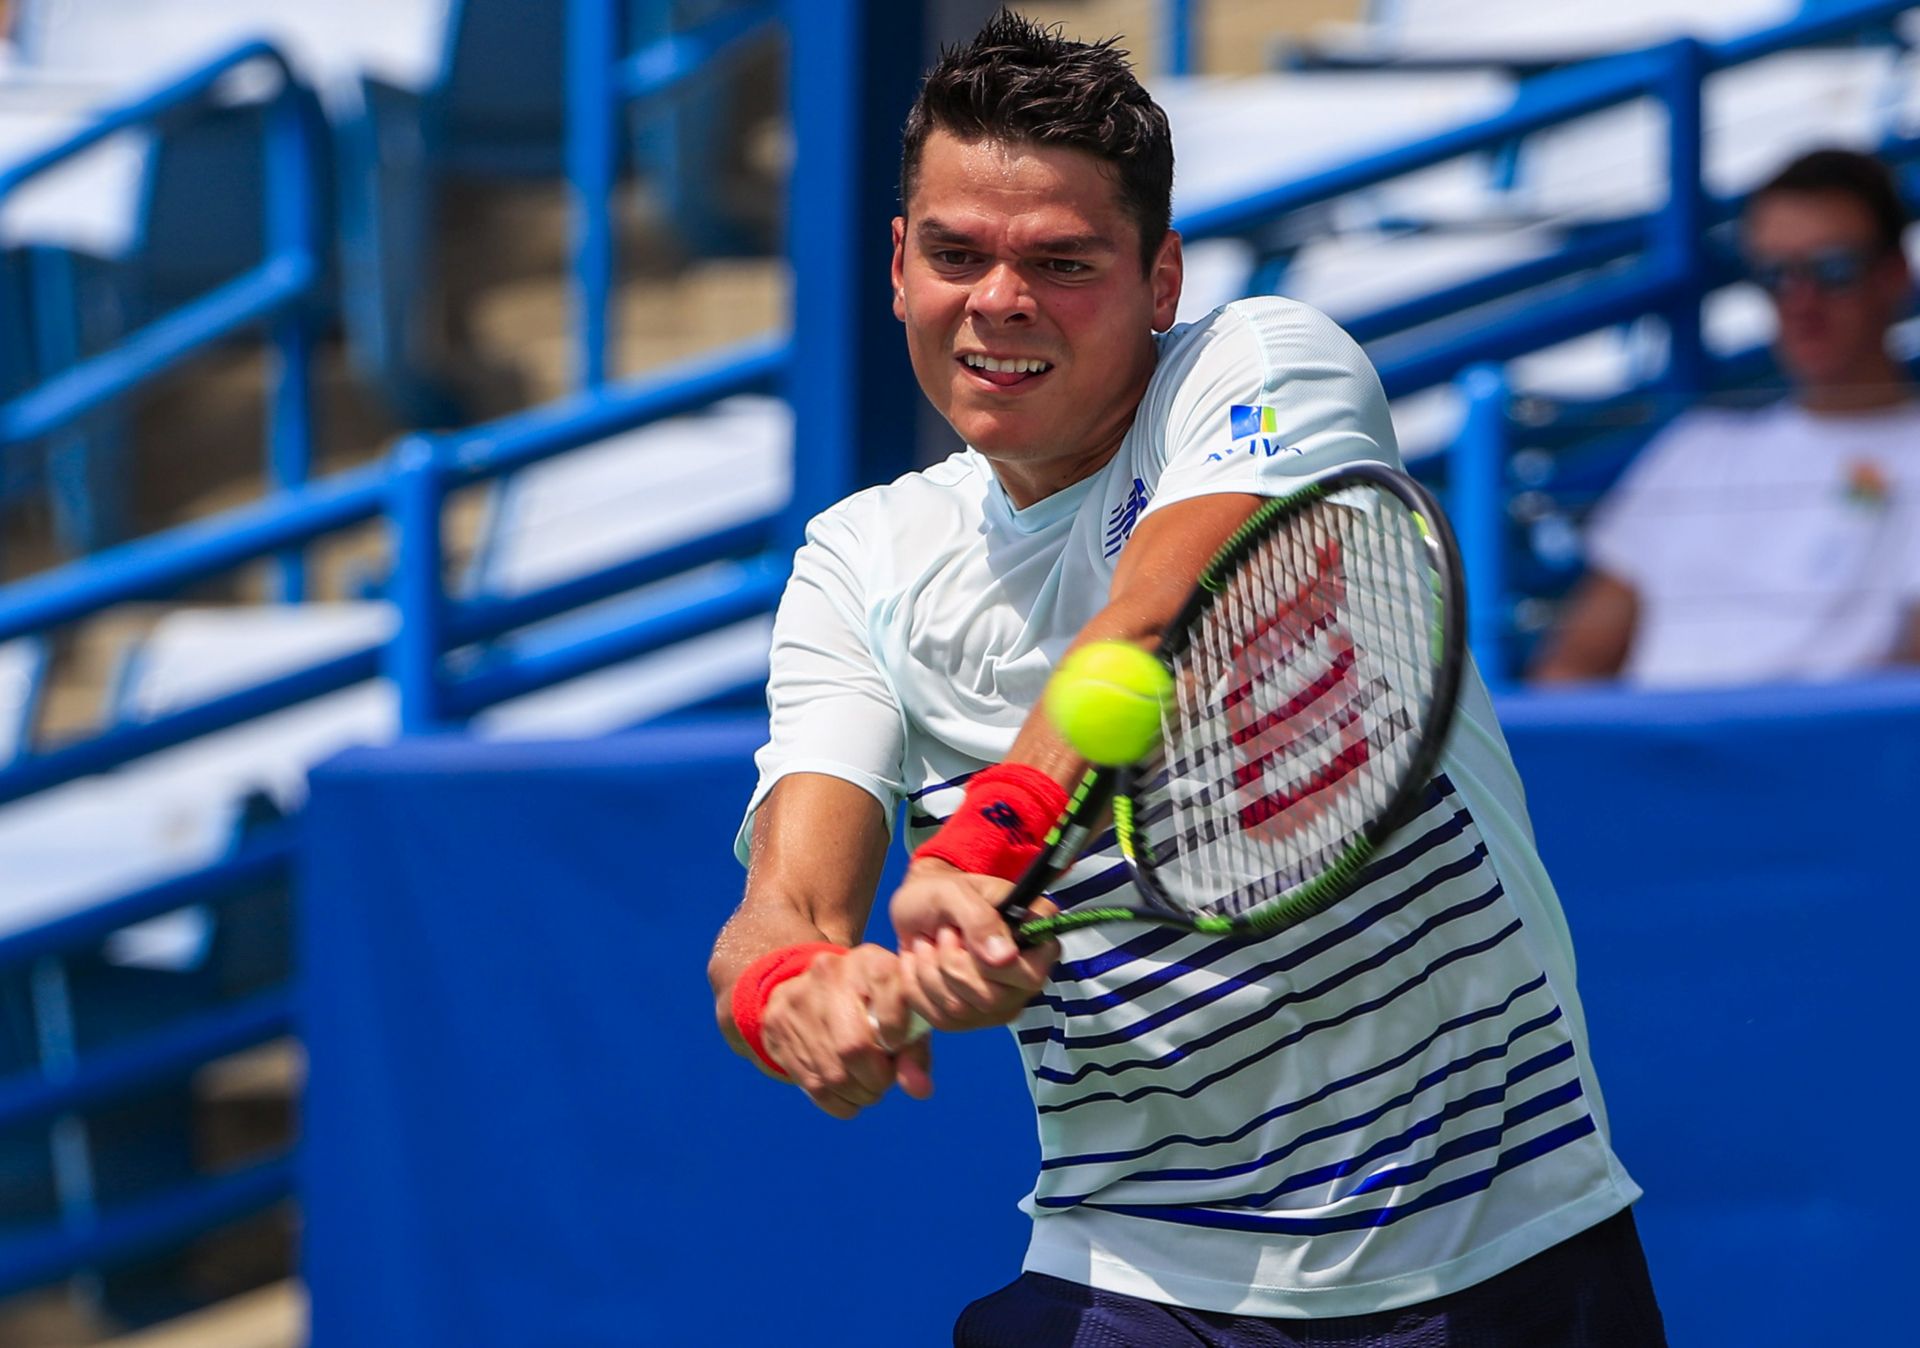 epa05499773 Milos Raonic of Canada hits a return shot to Dominic Thiem of Austria during their guarterfinal match in the Western & Southern Open tennis championships at the Linder Family Tennis Center in Mason, near Cincinnati, Ohio, USA, 19 August 2016.  EPA/TANNEN MAURY